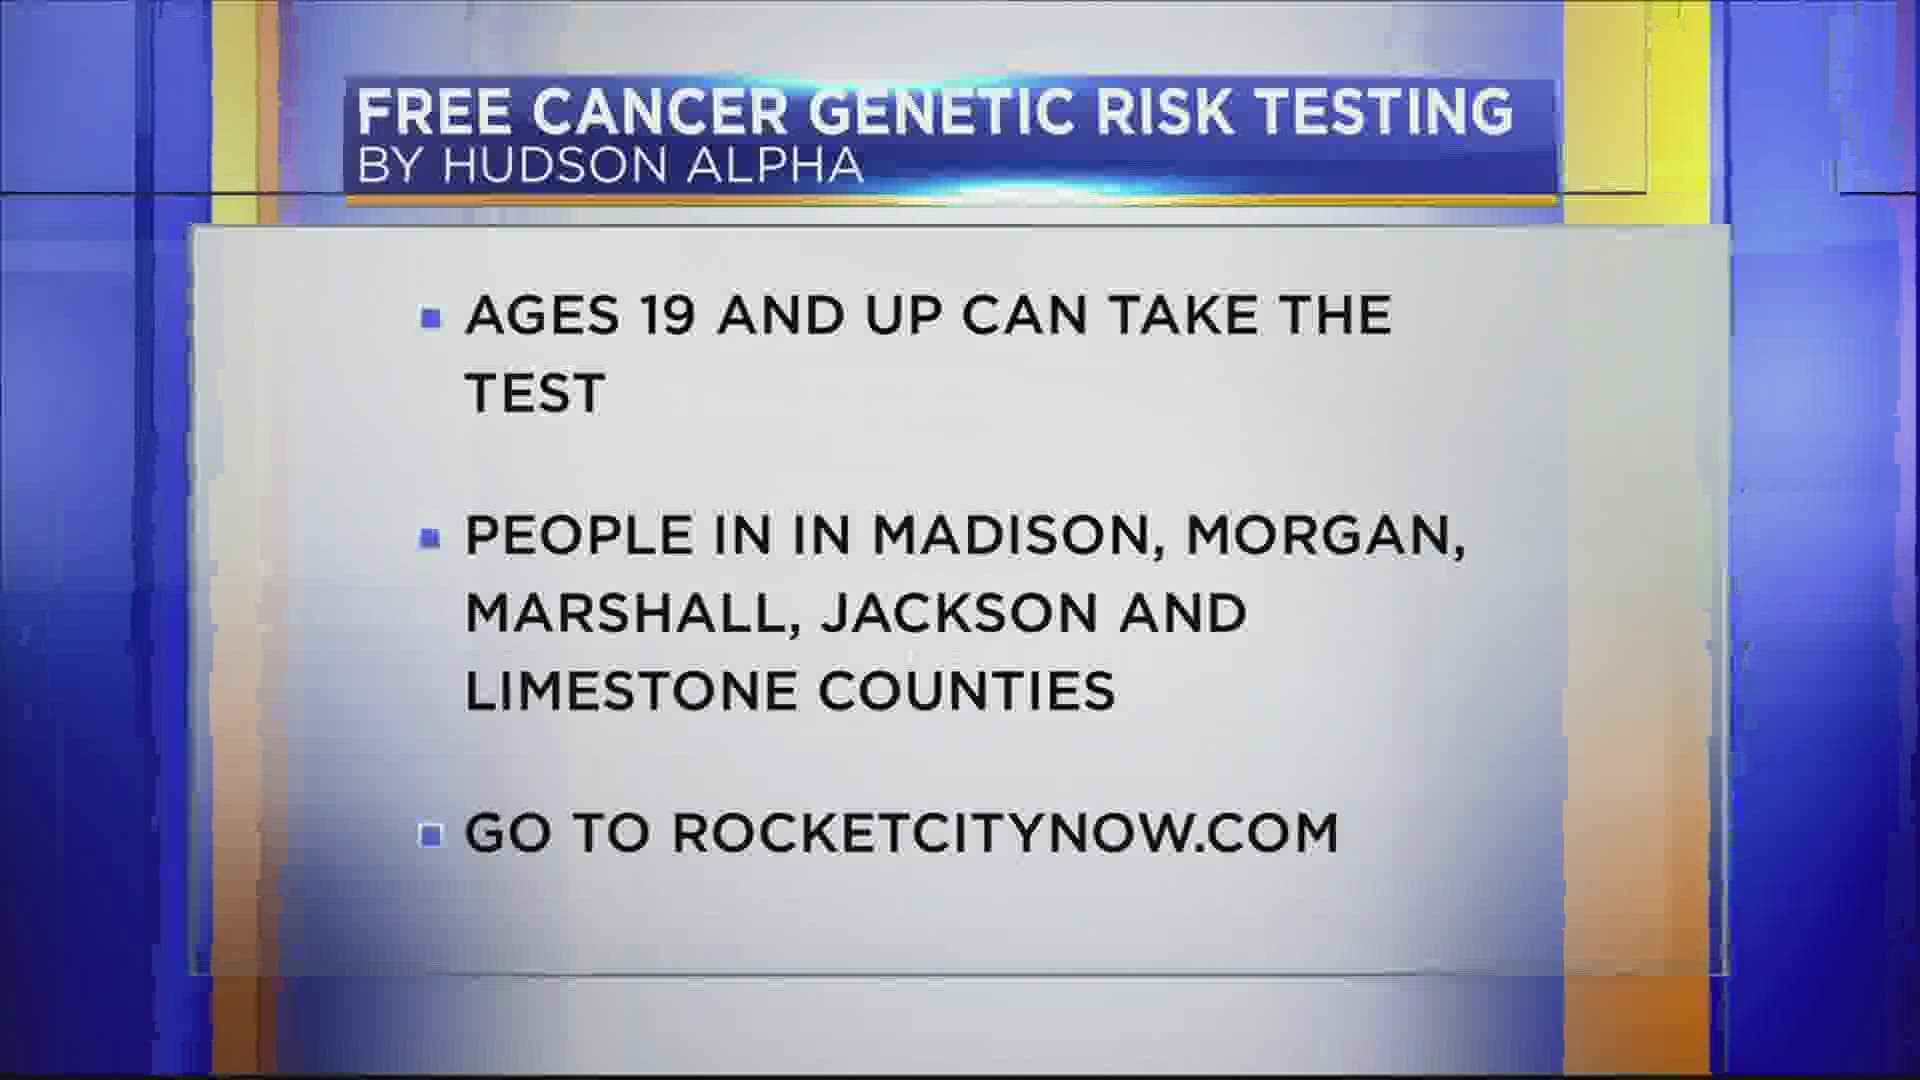 HudsonAlpha offers free testing to adults 19 or older in Madison, Morgan, Marshall, Jackson and Limestone counties.